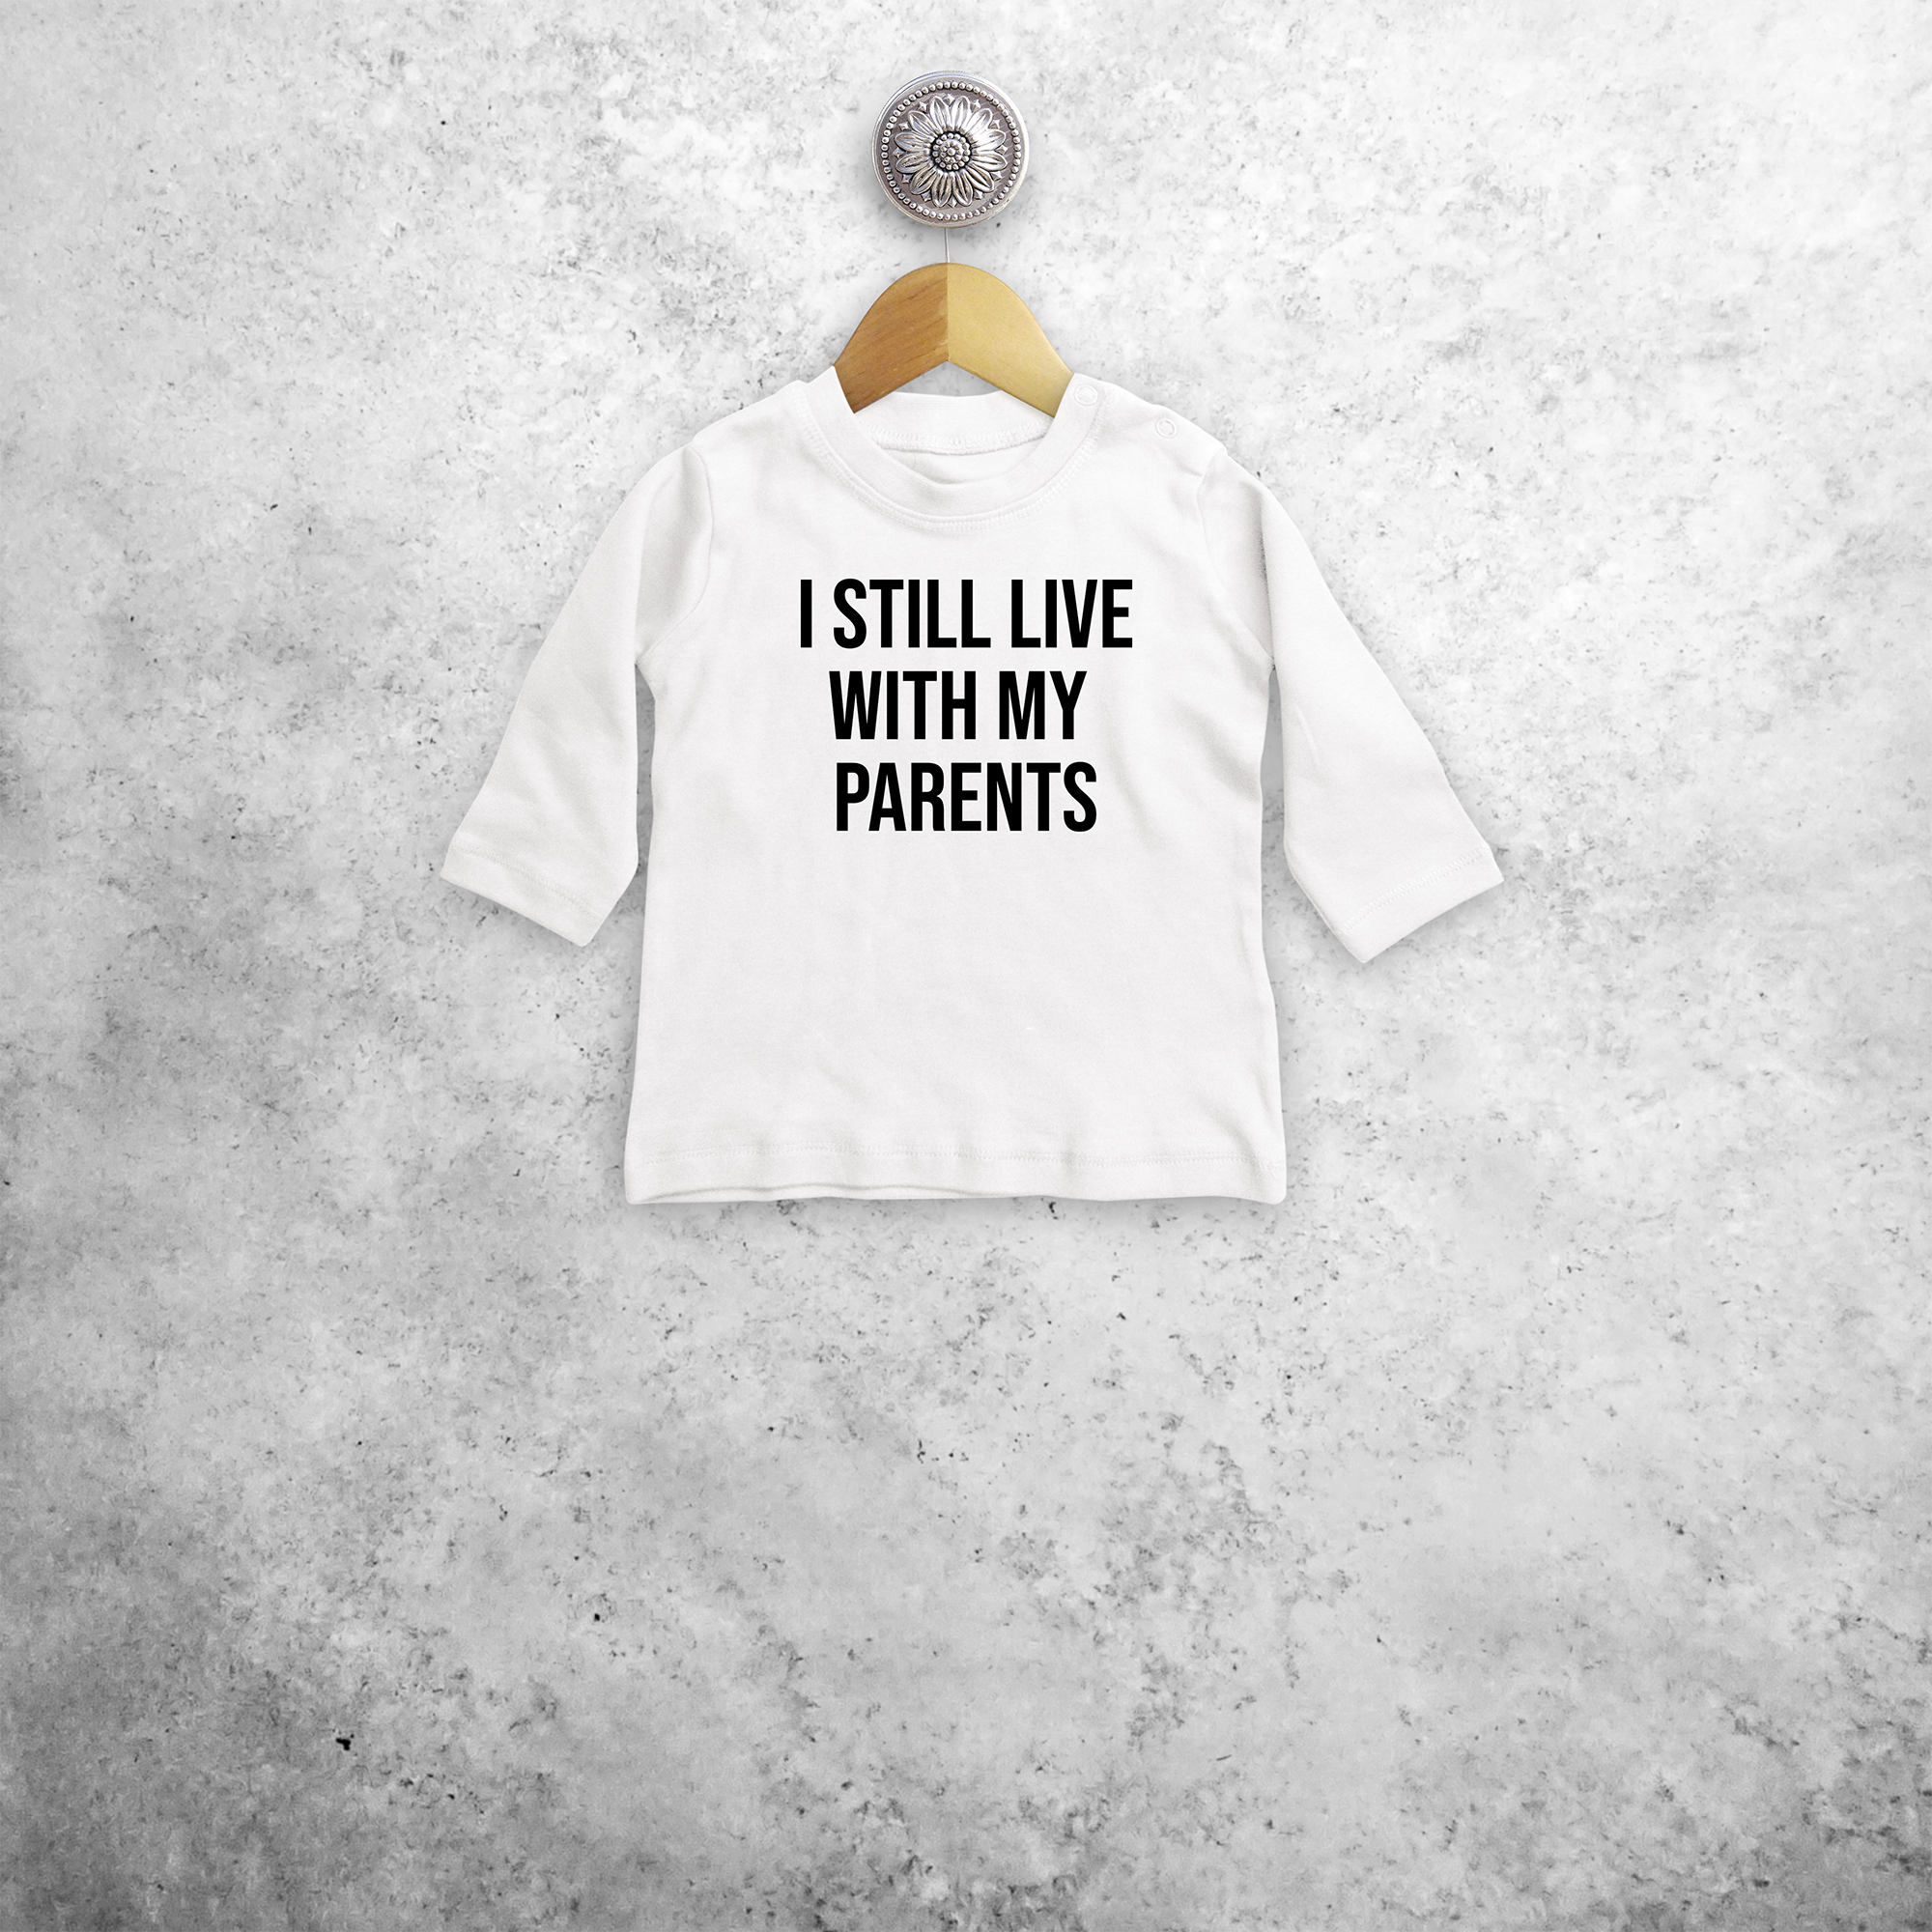 'I still live with my parents' baby longsleeve shirt